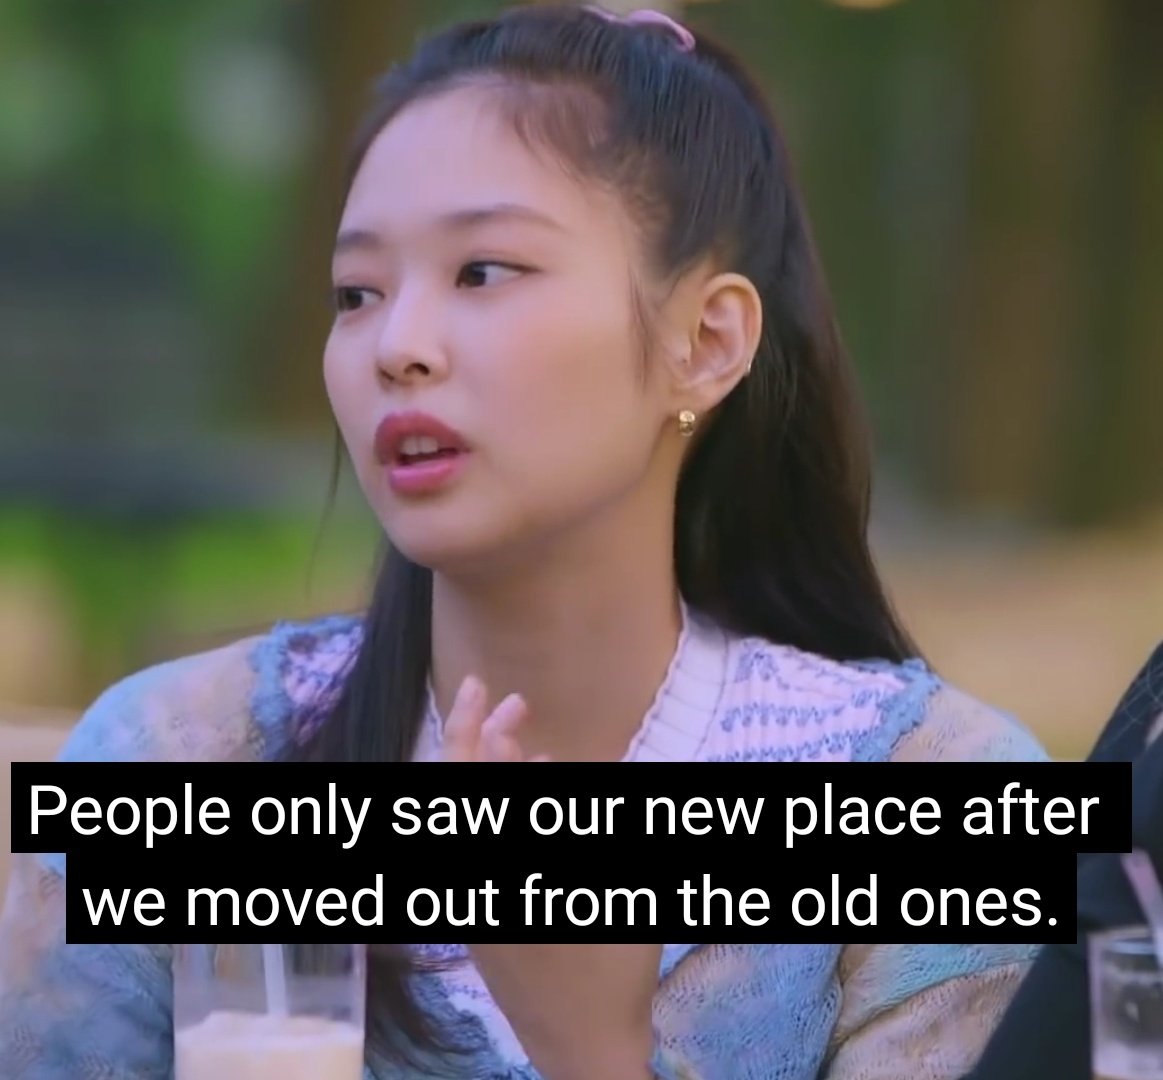   @BLACKPINK are not the "privileged, fed with silver spoon" girls yall think they are. Just because they don't make songs and constantly talk about what they've gone through like some other people, doesn't mean they had it easy. They worked for their success and they deserve it